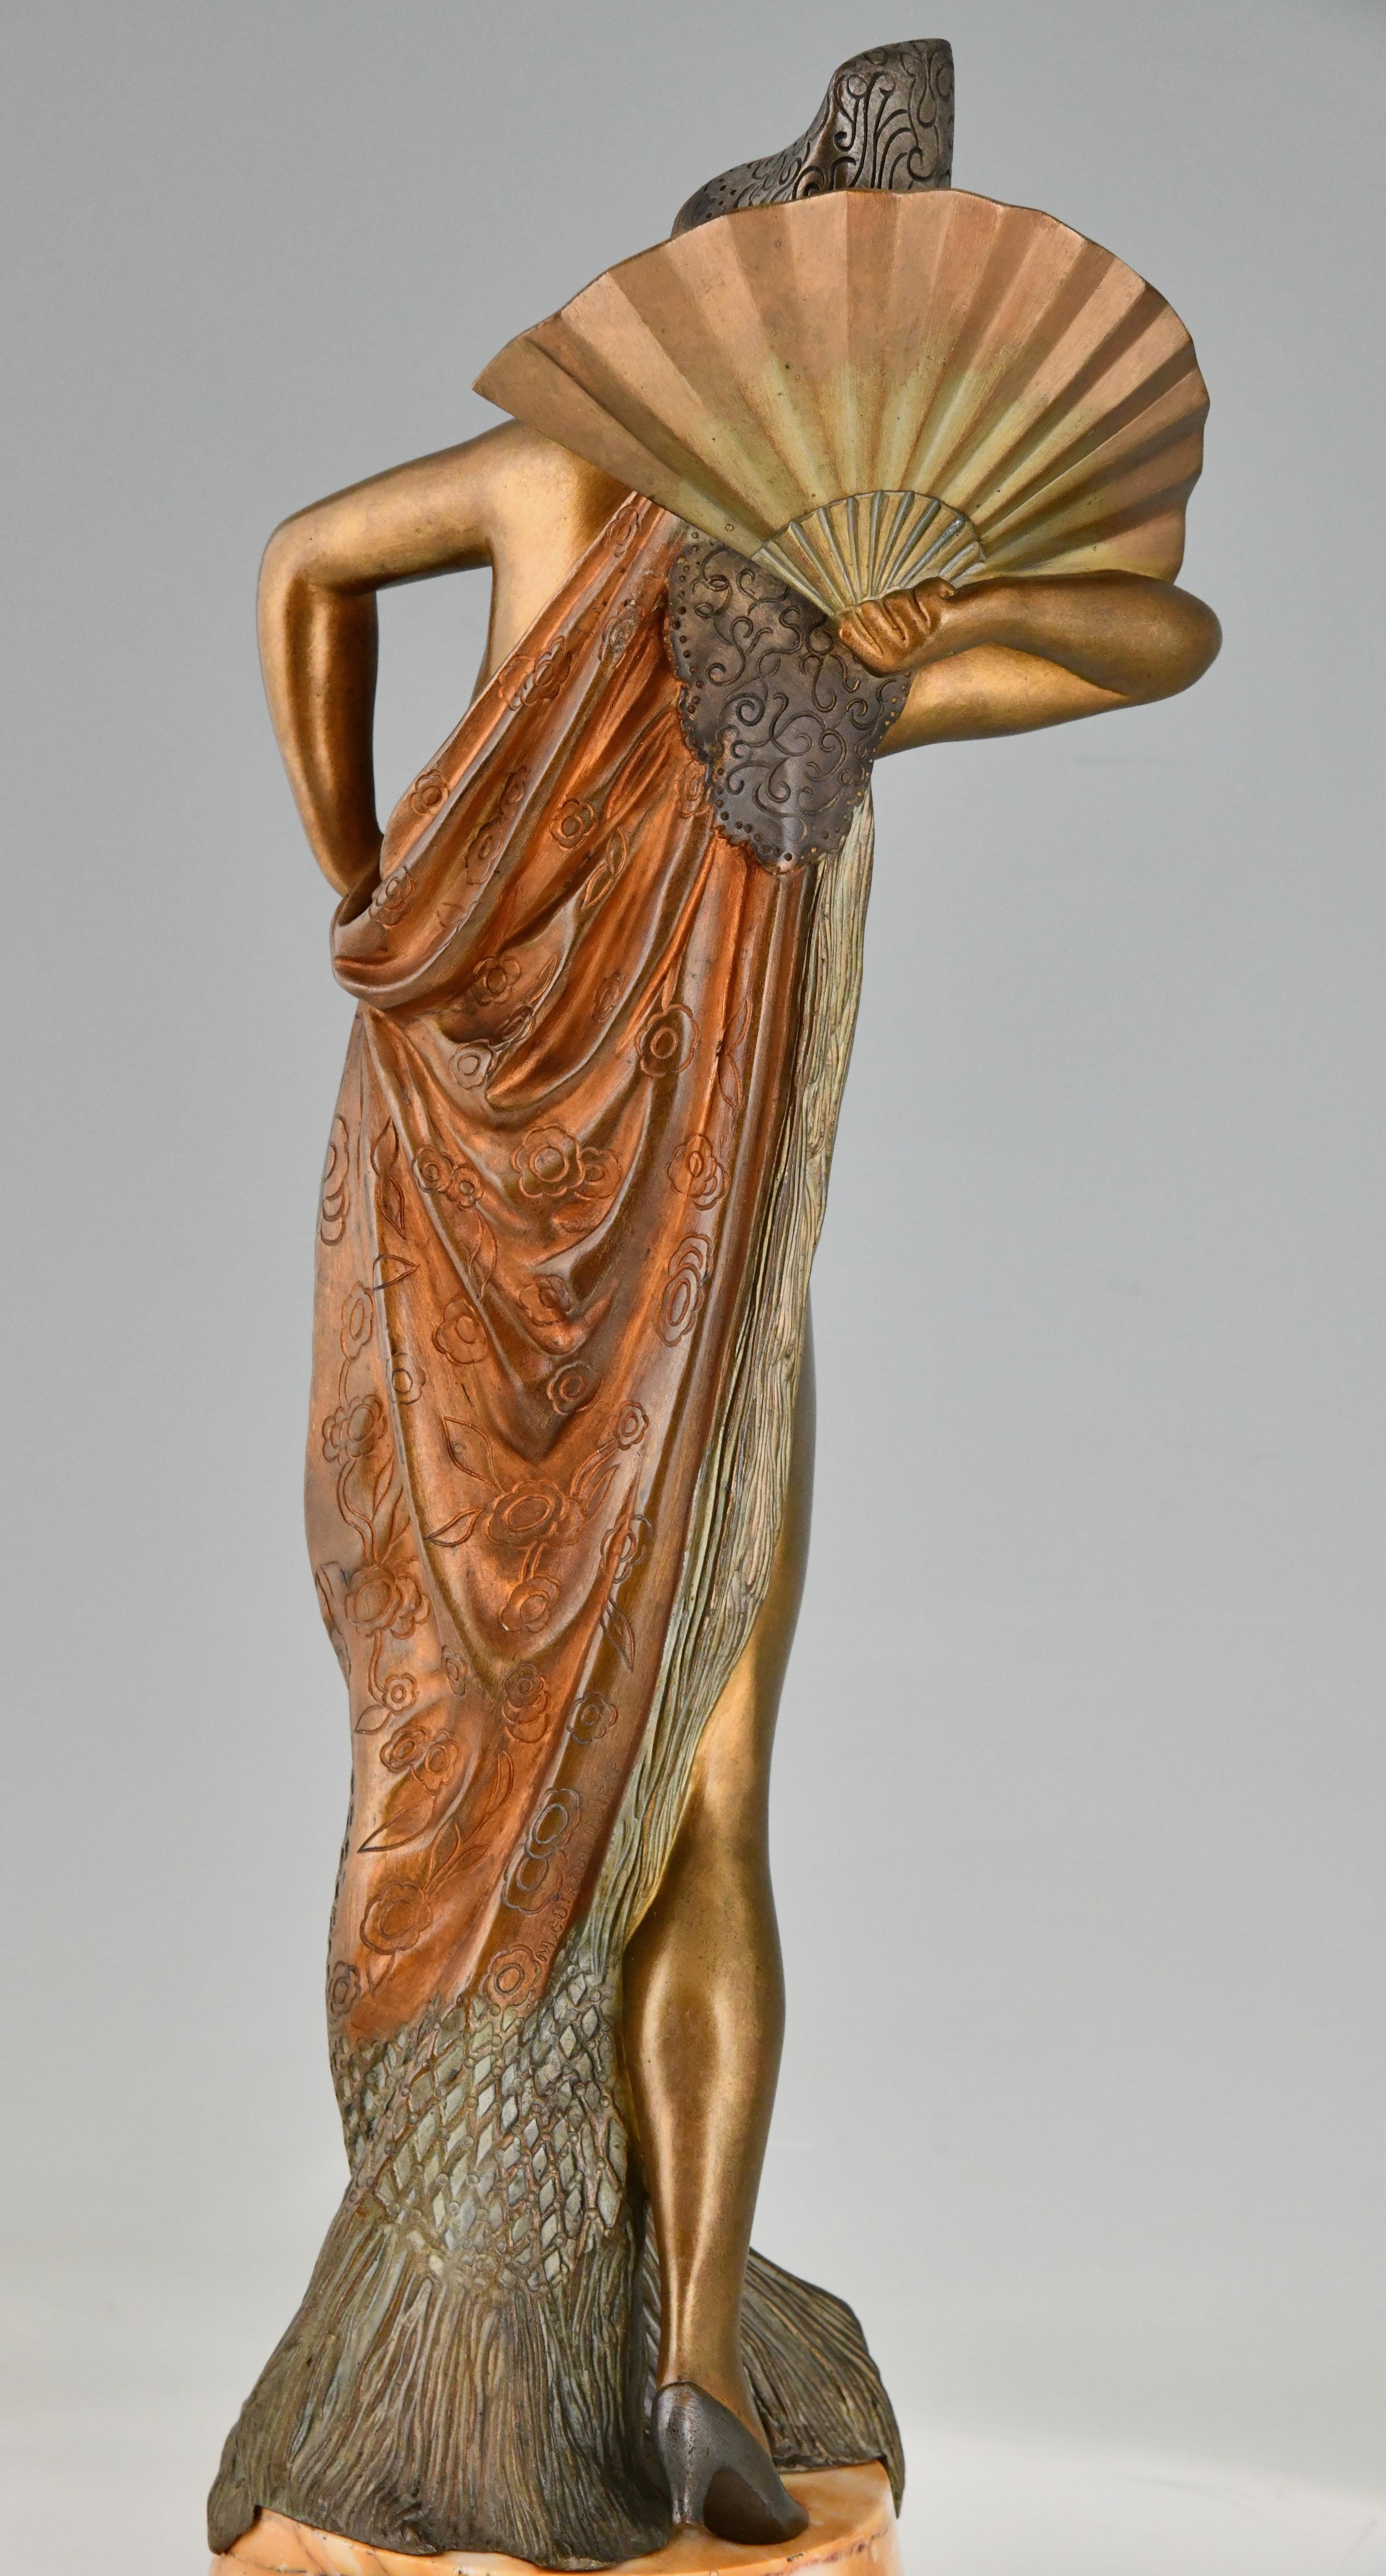 Art Deco Bronze Sculpture of a Spanish Dancer by Maurice Guiraud Rivière 1925 For Sale 2